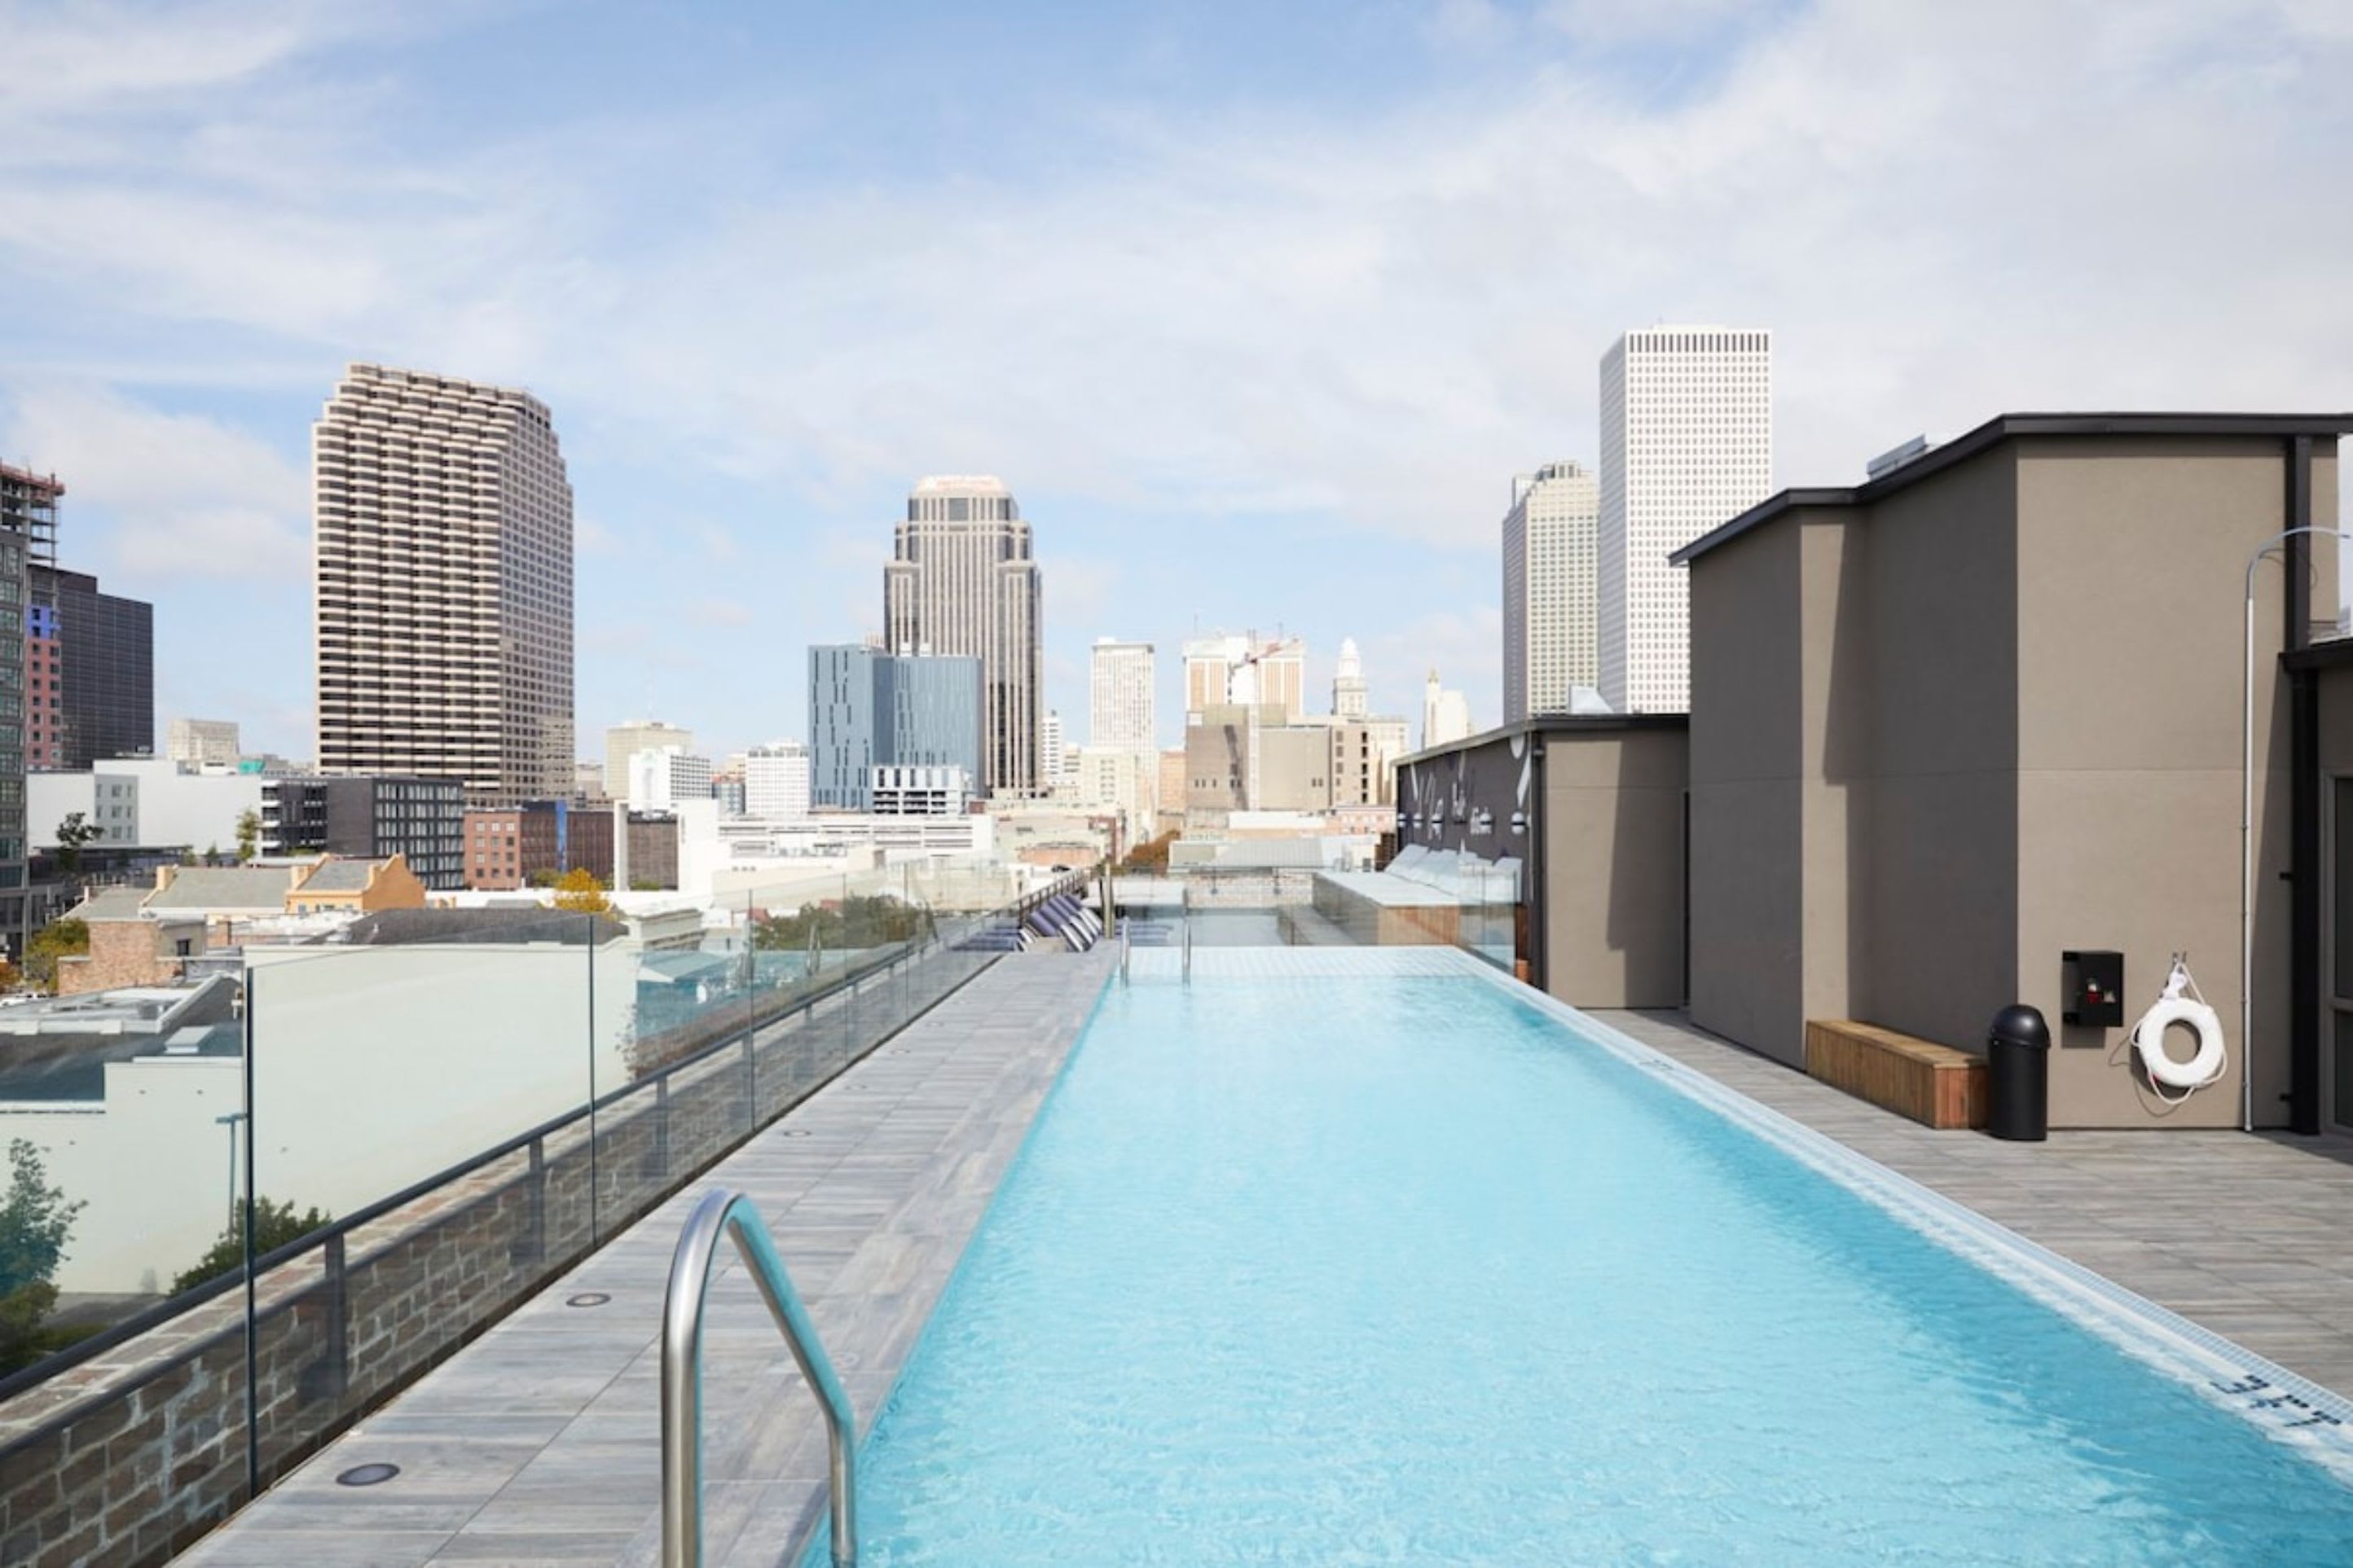 Property Image 2 - The Brandywine | Rooftop Pool | 5 min drive to Bourbon St | 1 Bed 1 Bath